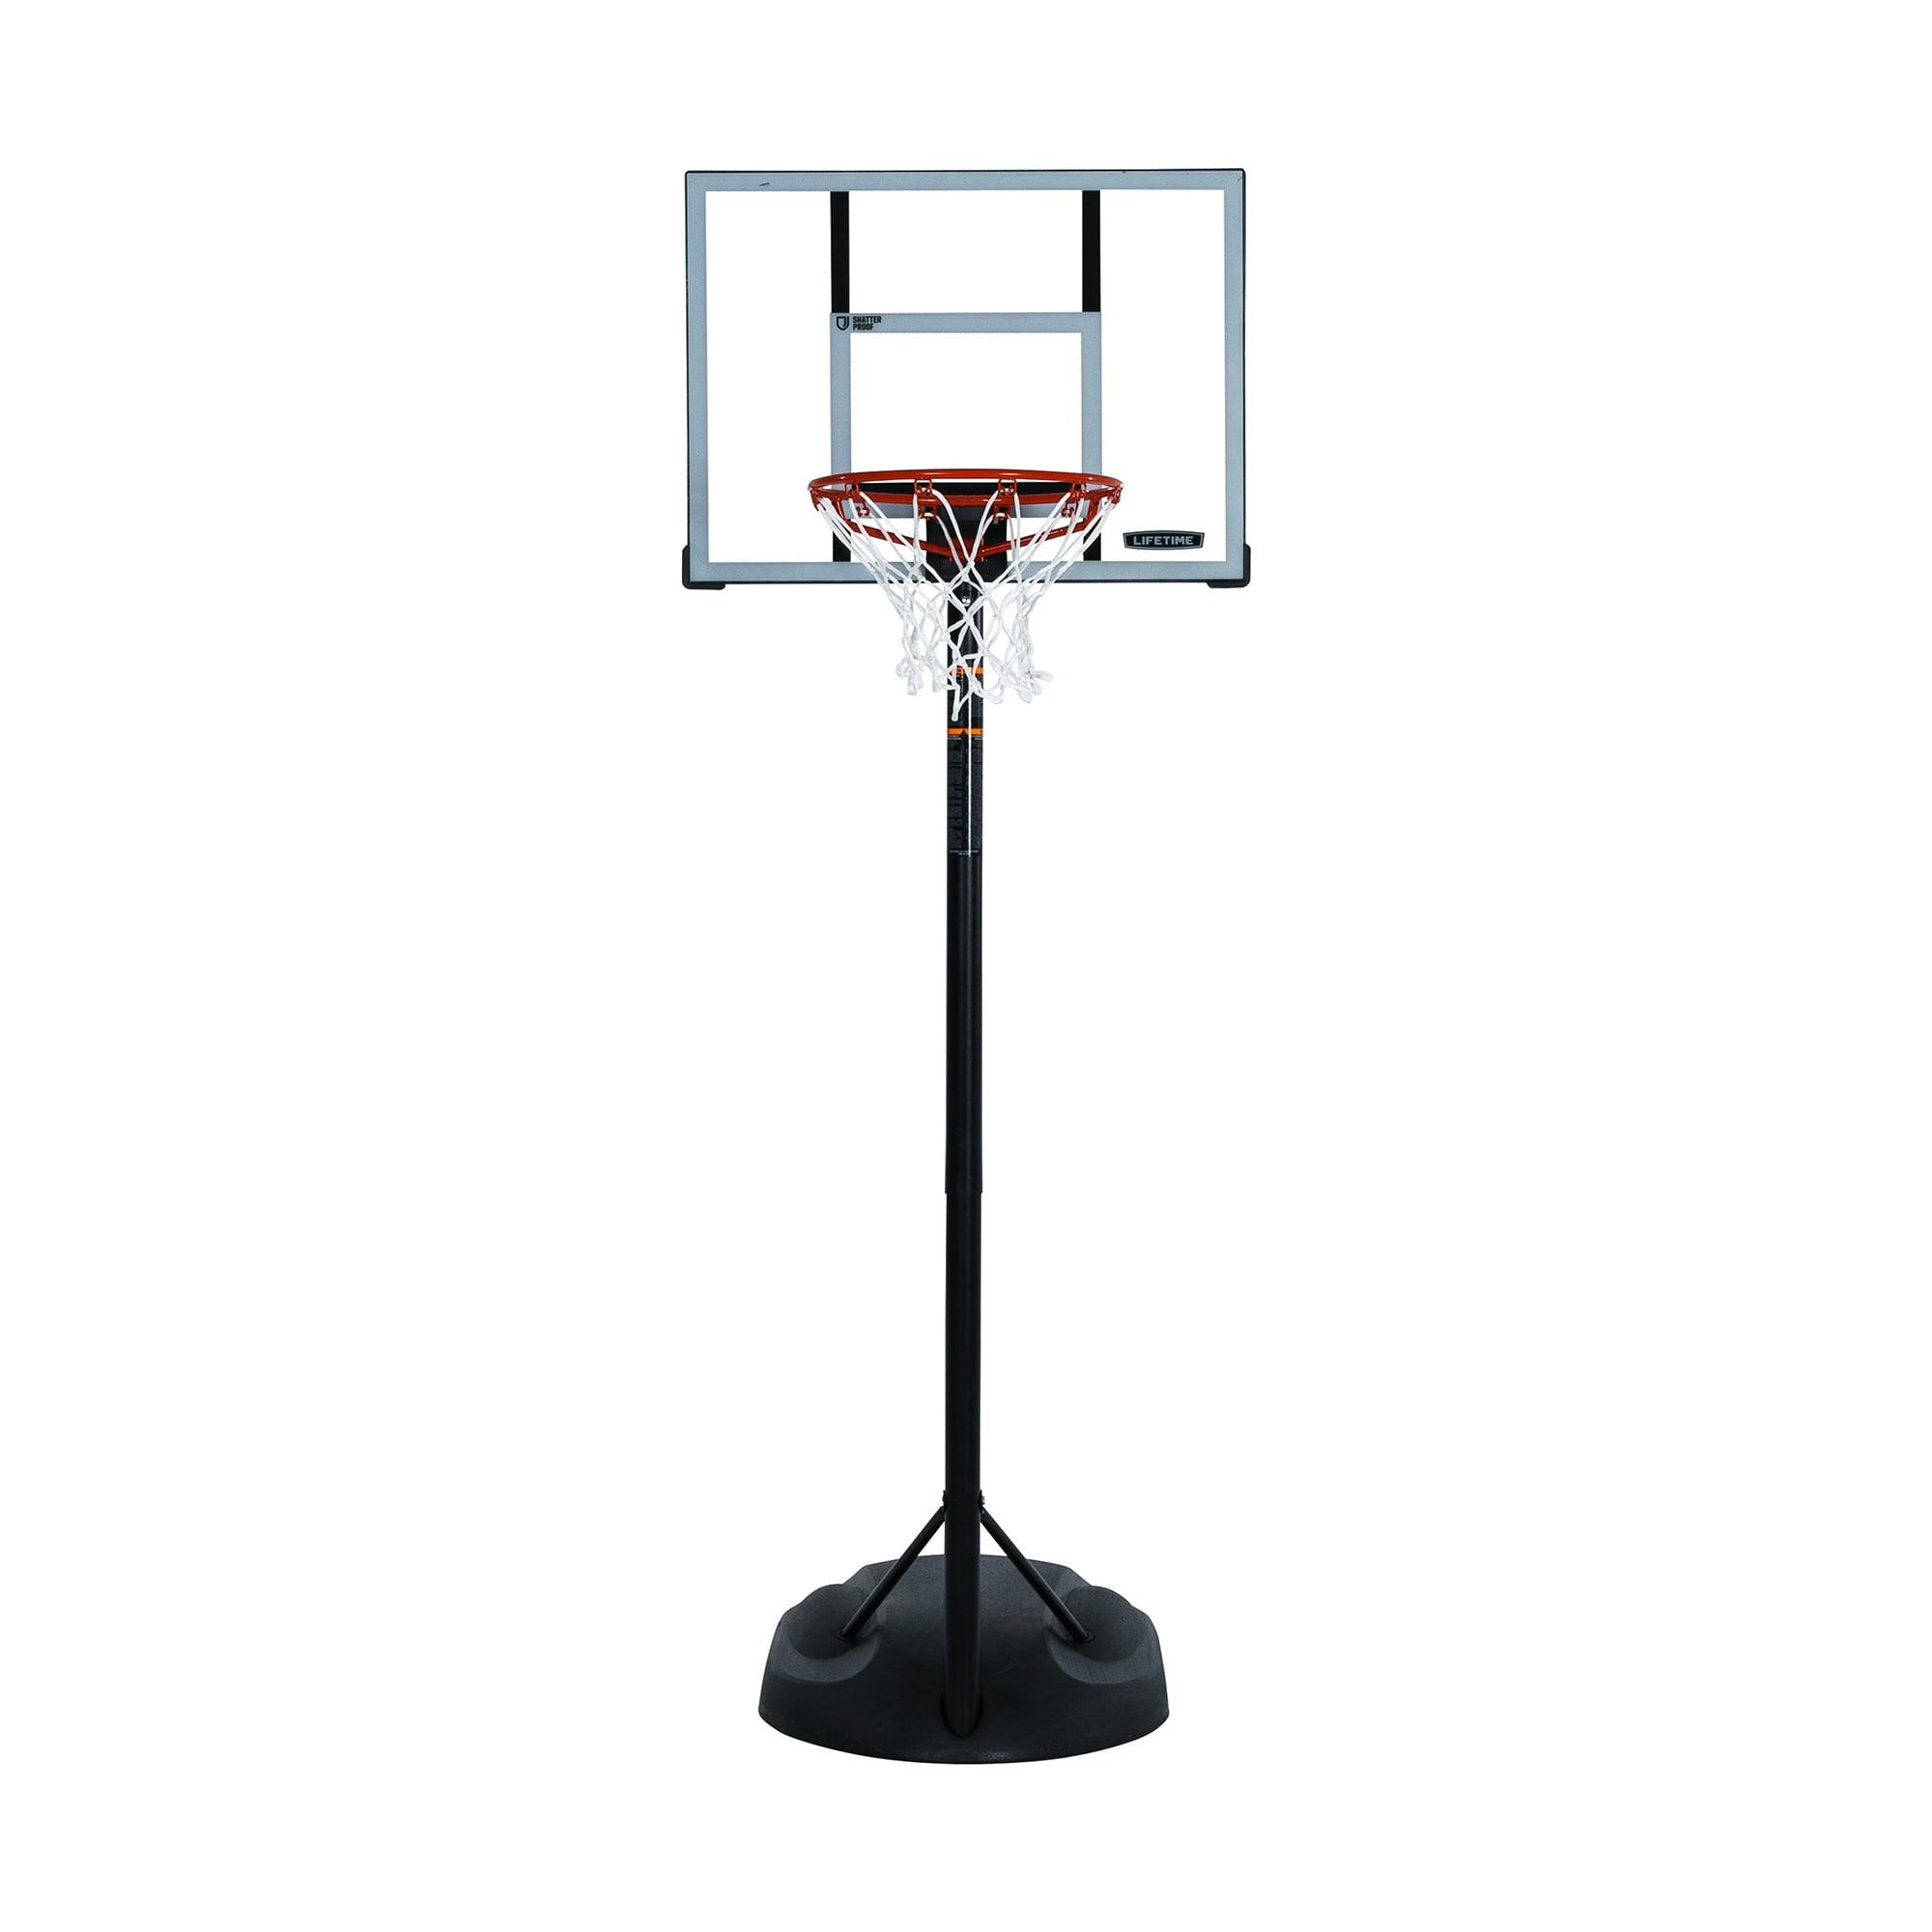 Adjustable Youth 30" Polycarbonate Portable Basketball Hoop